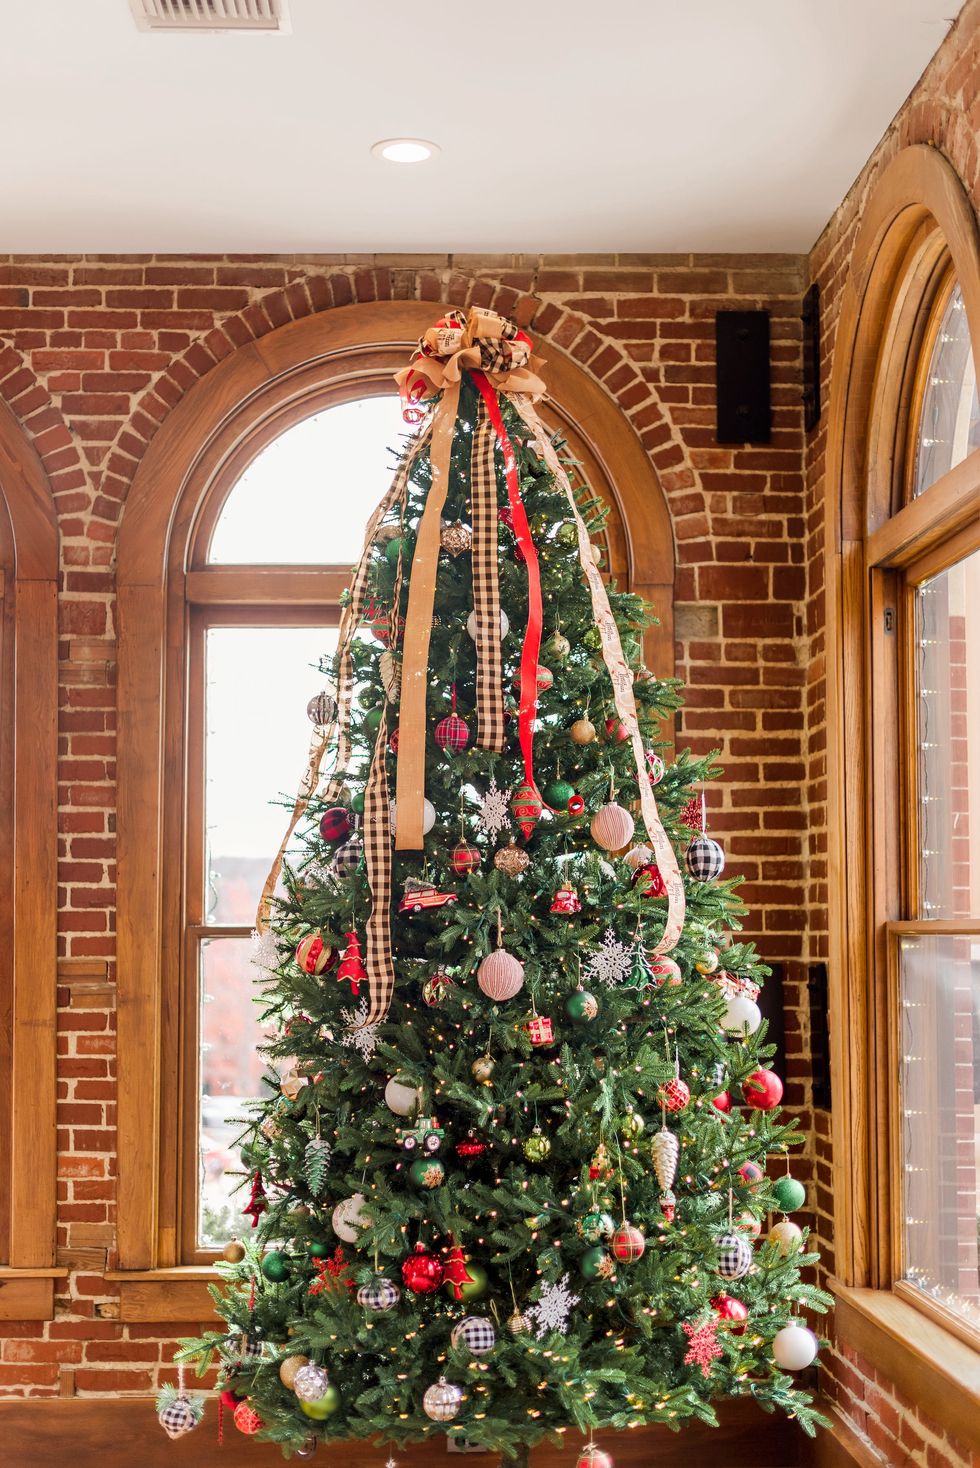 When to Put Up Your Christmas Tree, According to Tradition